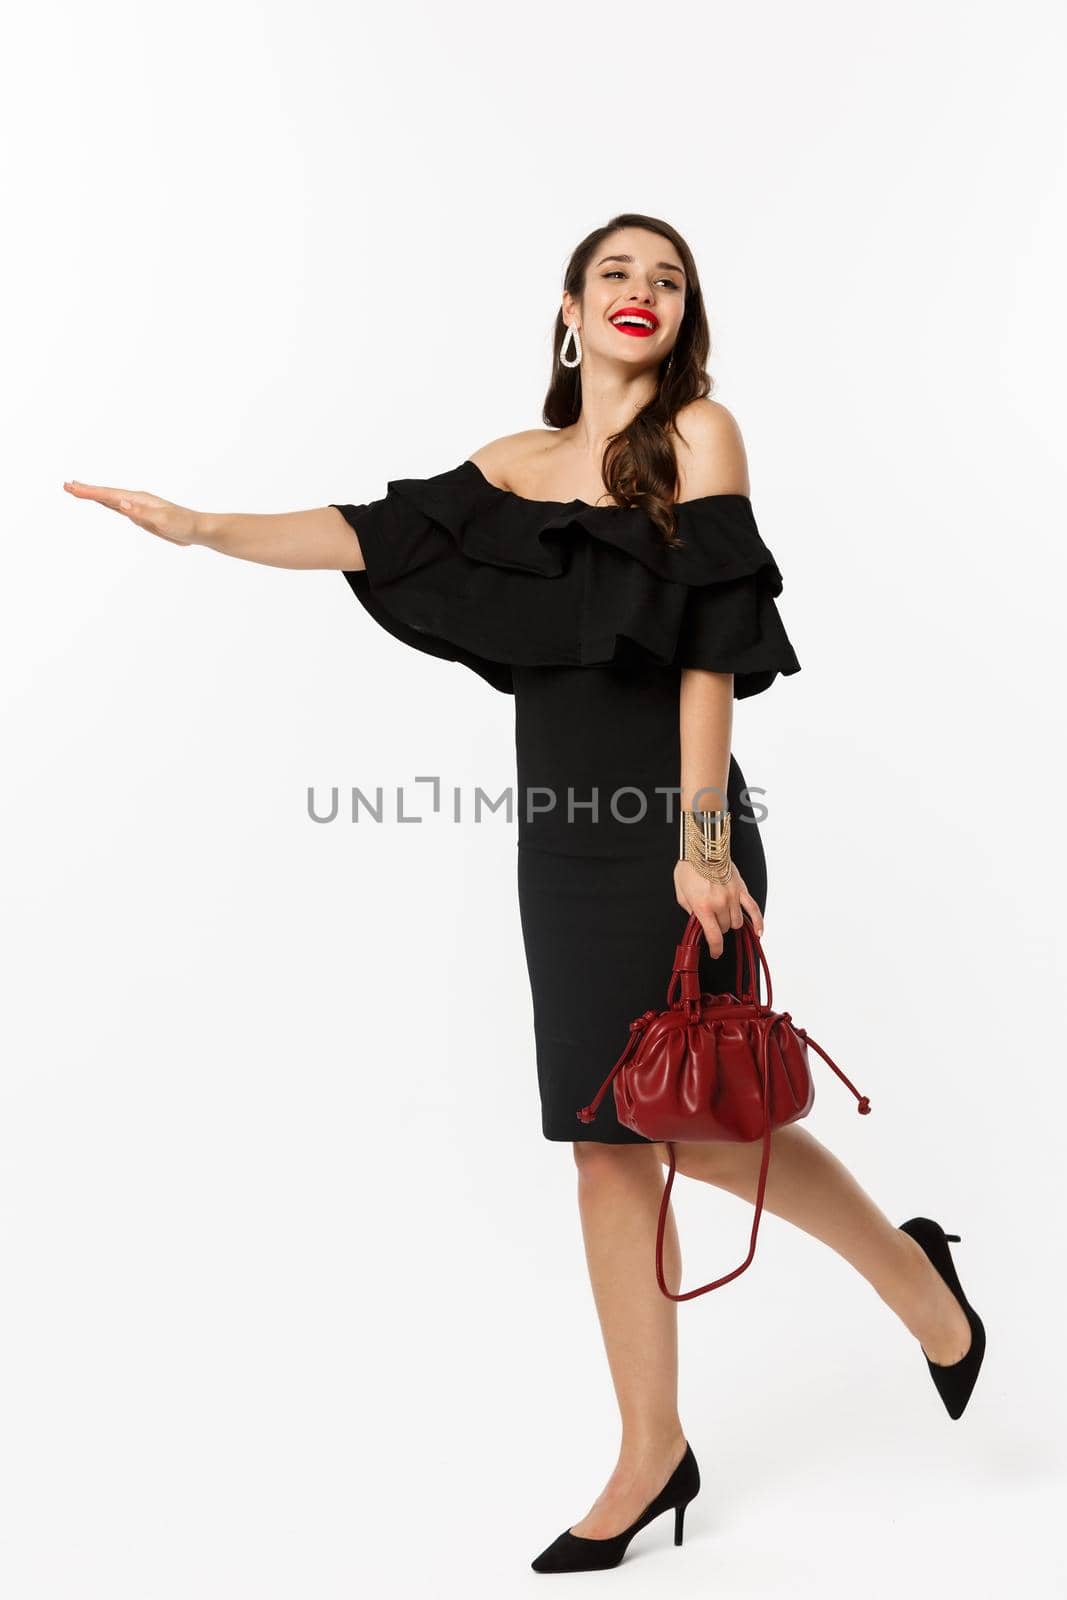 Beauty and fashion concept. Full length of glamour woman in black dress and high heels raising hand to stop taxi, need a ride, standing over white background.